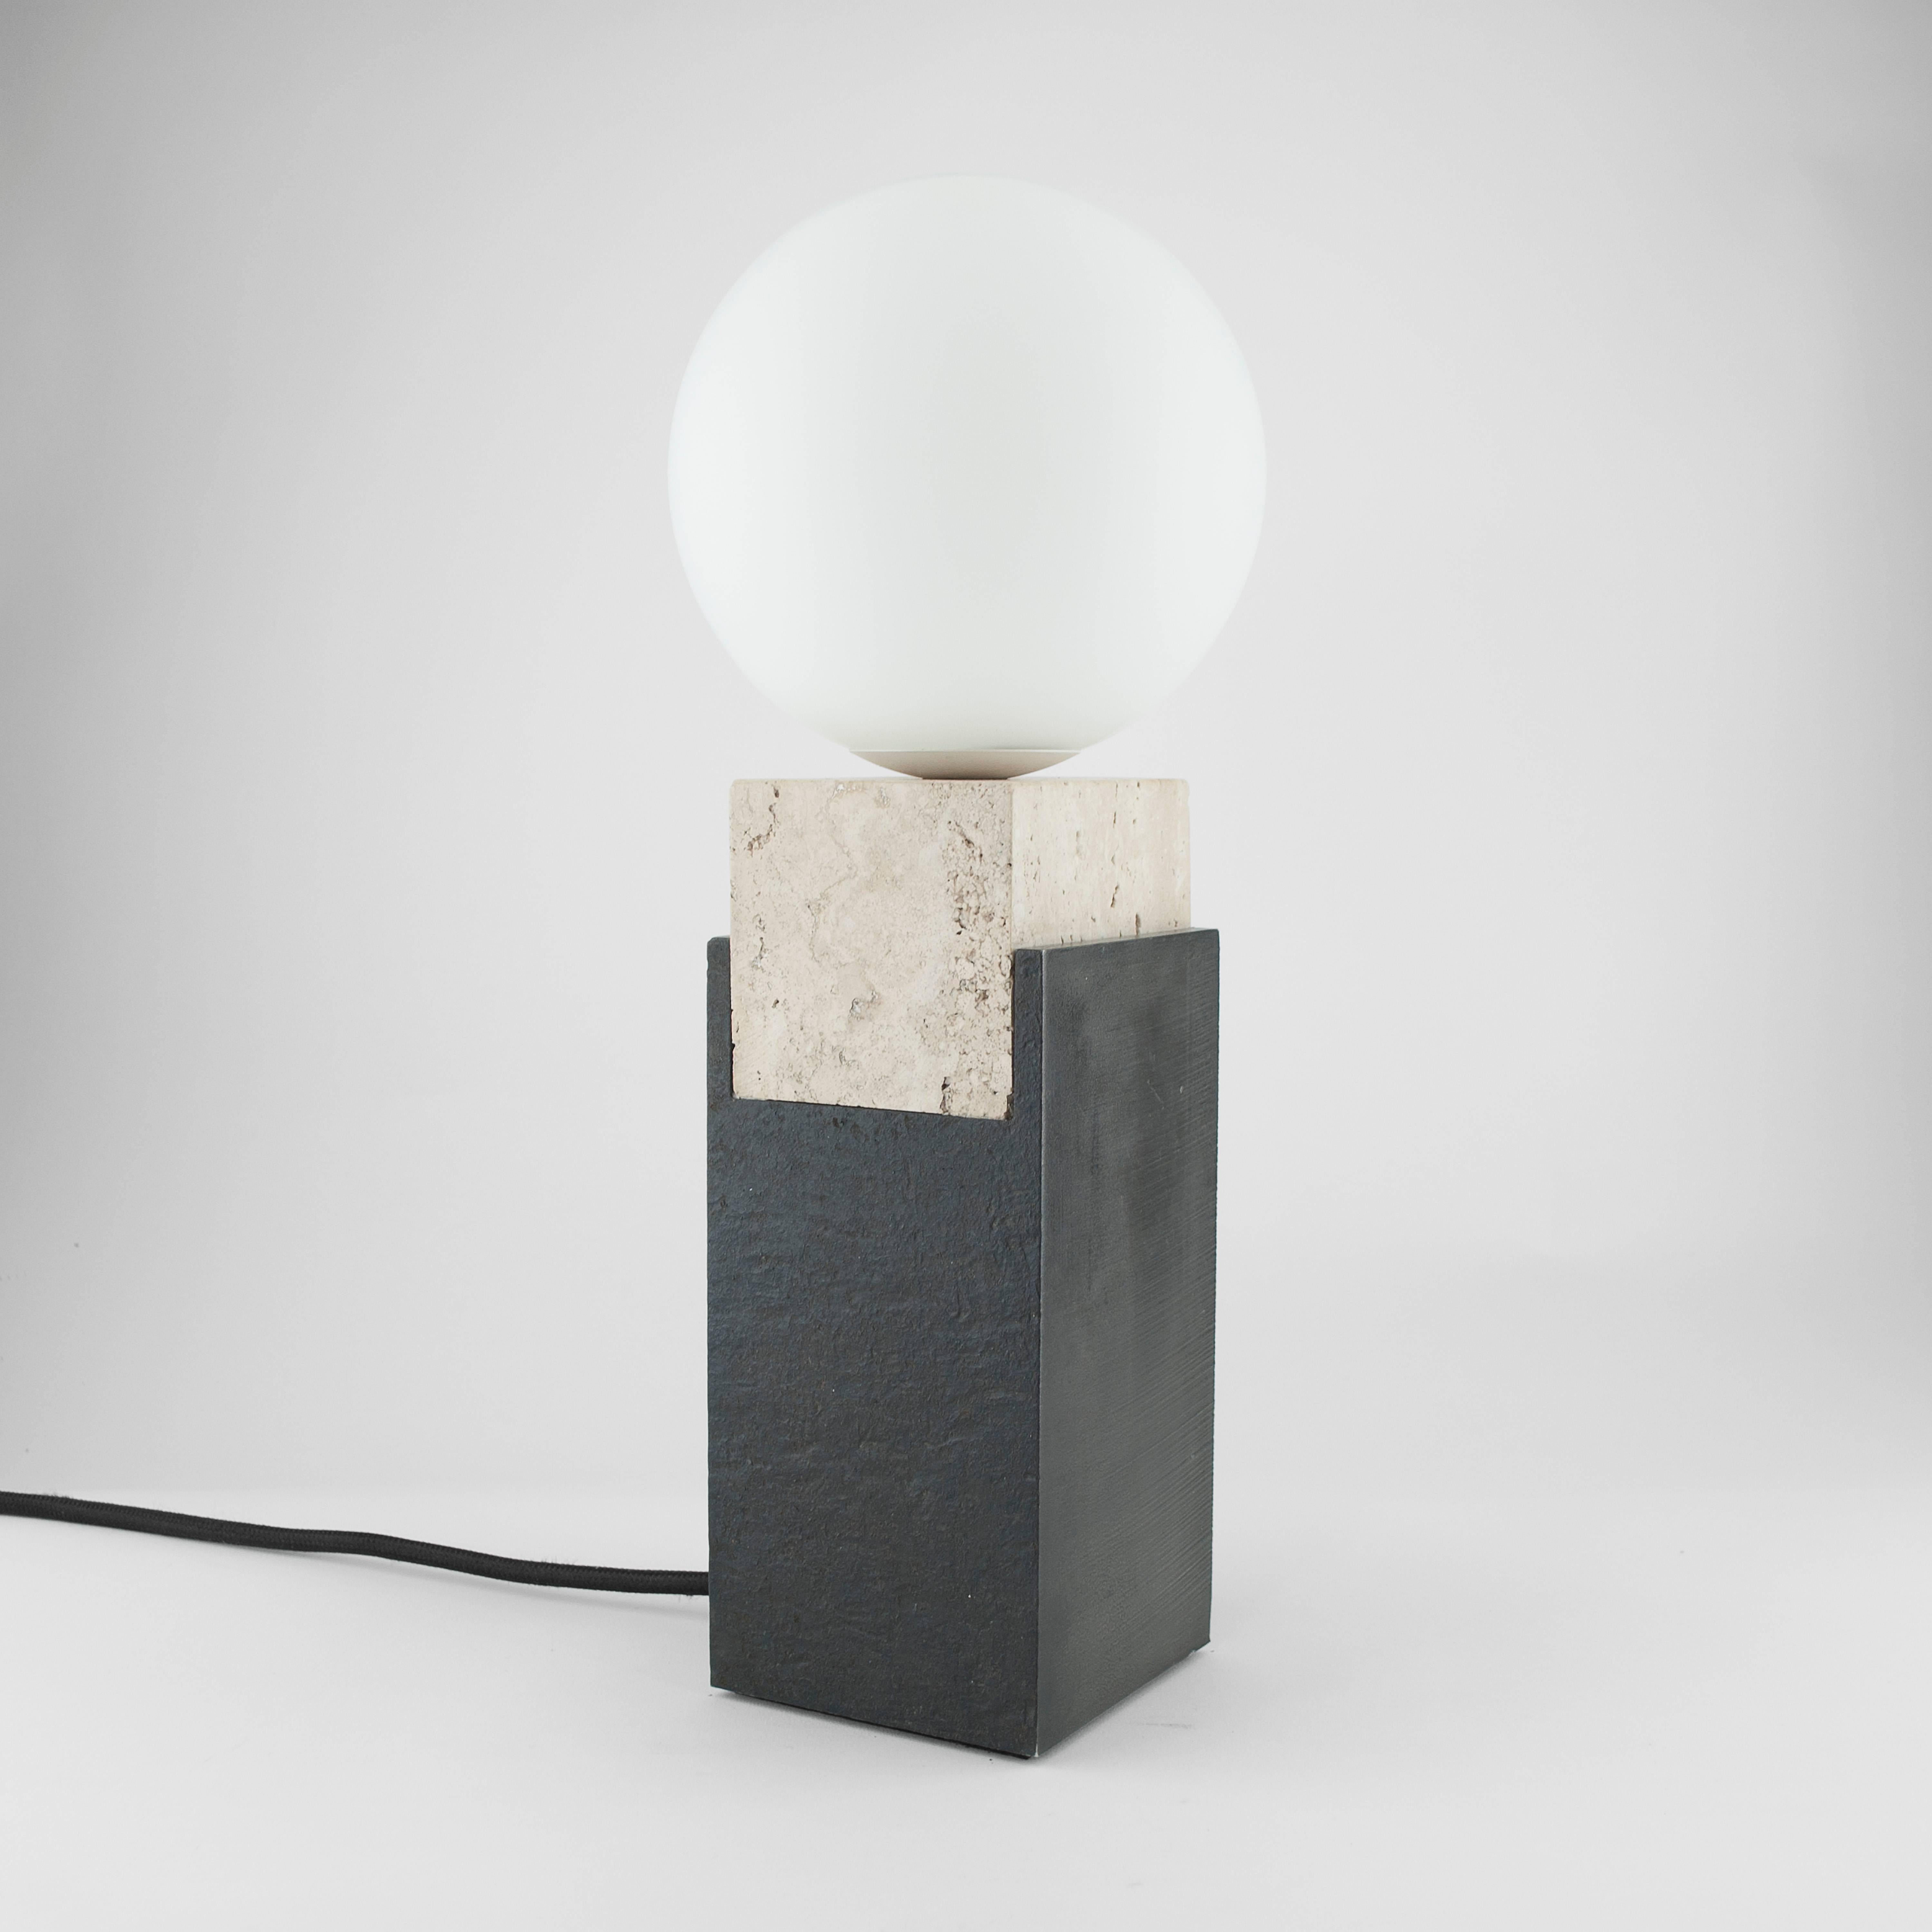 Louis Jobst' monument lamps are high quality, bespoke and handmade using solid raw materials. The bases are finished with a black patina and cut from 90mm thick steel billet. Markings from the process are visible and intentionally left, exposing the